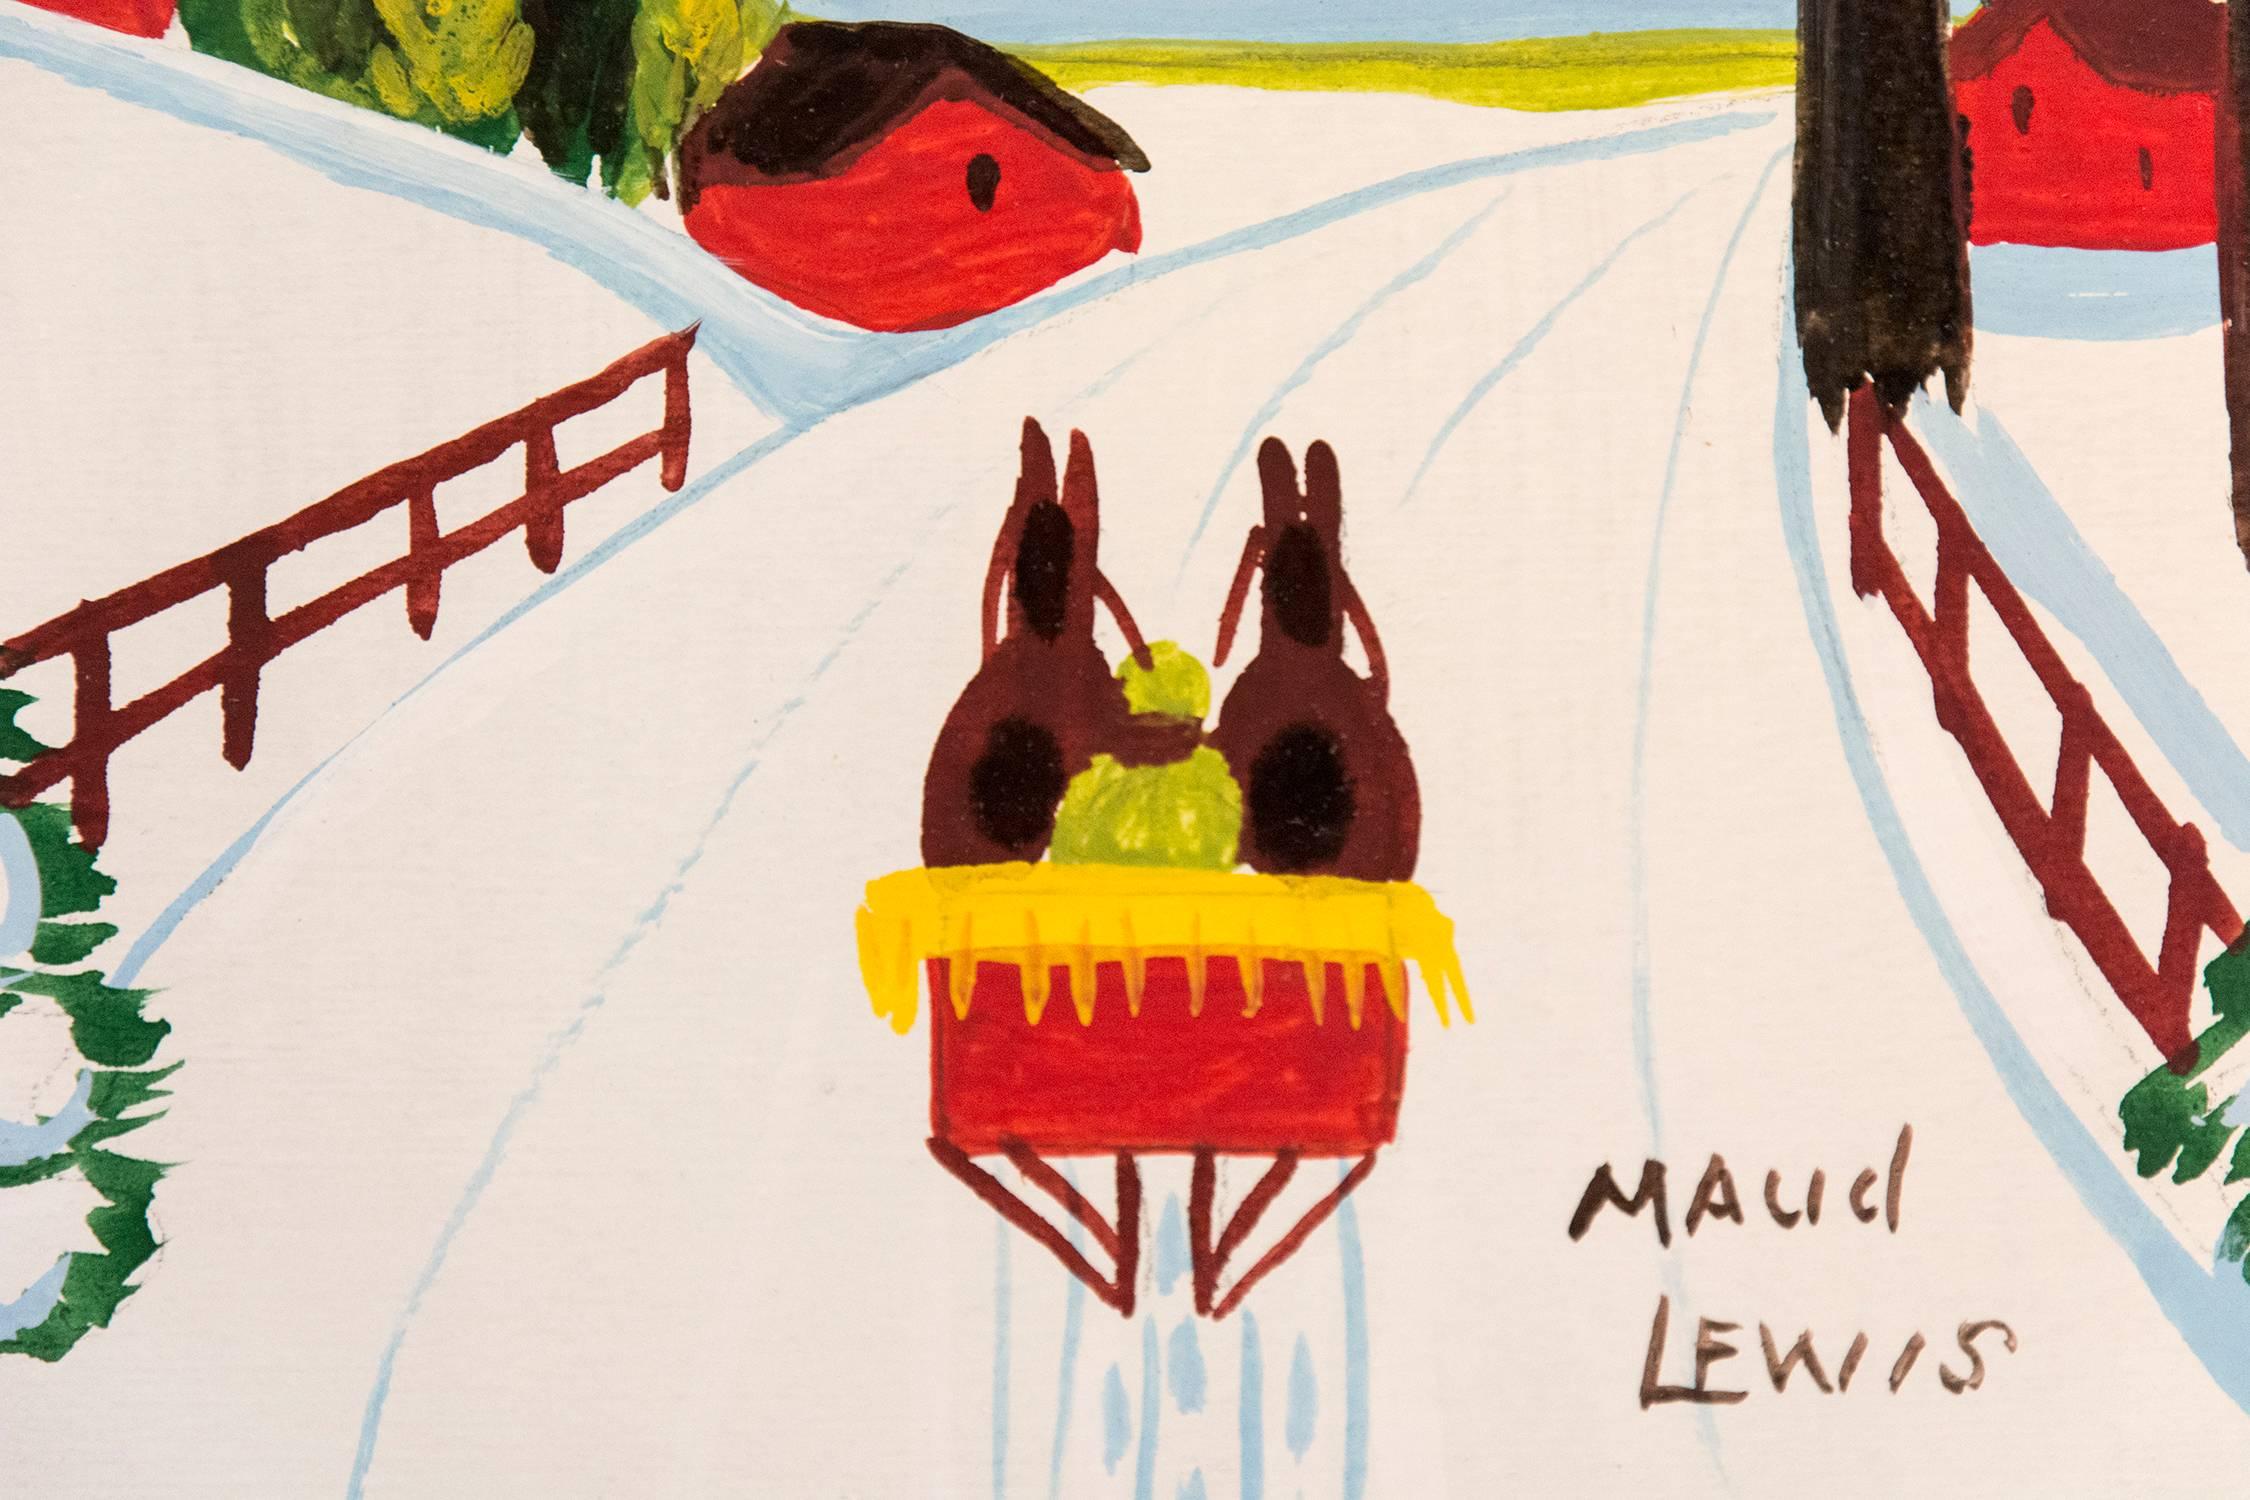 Sleigh - Painting by Maud Lewis